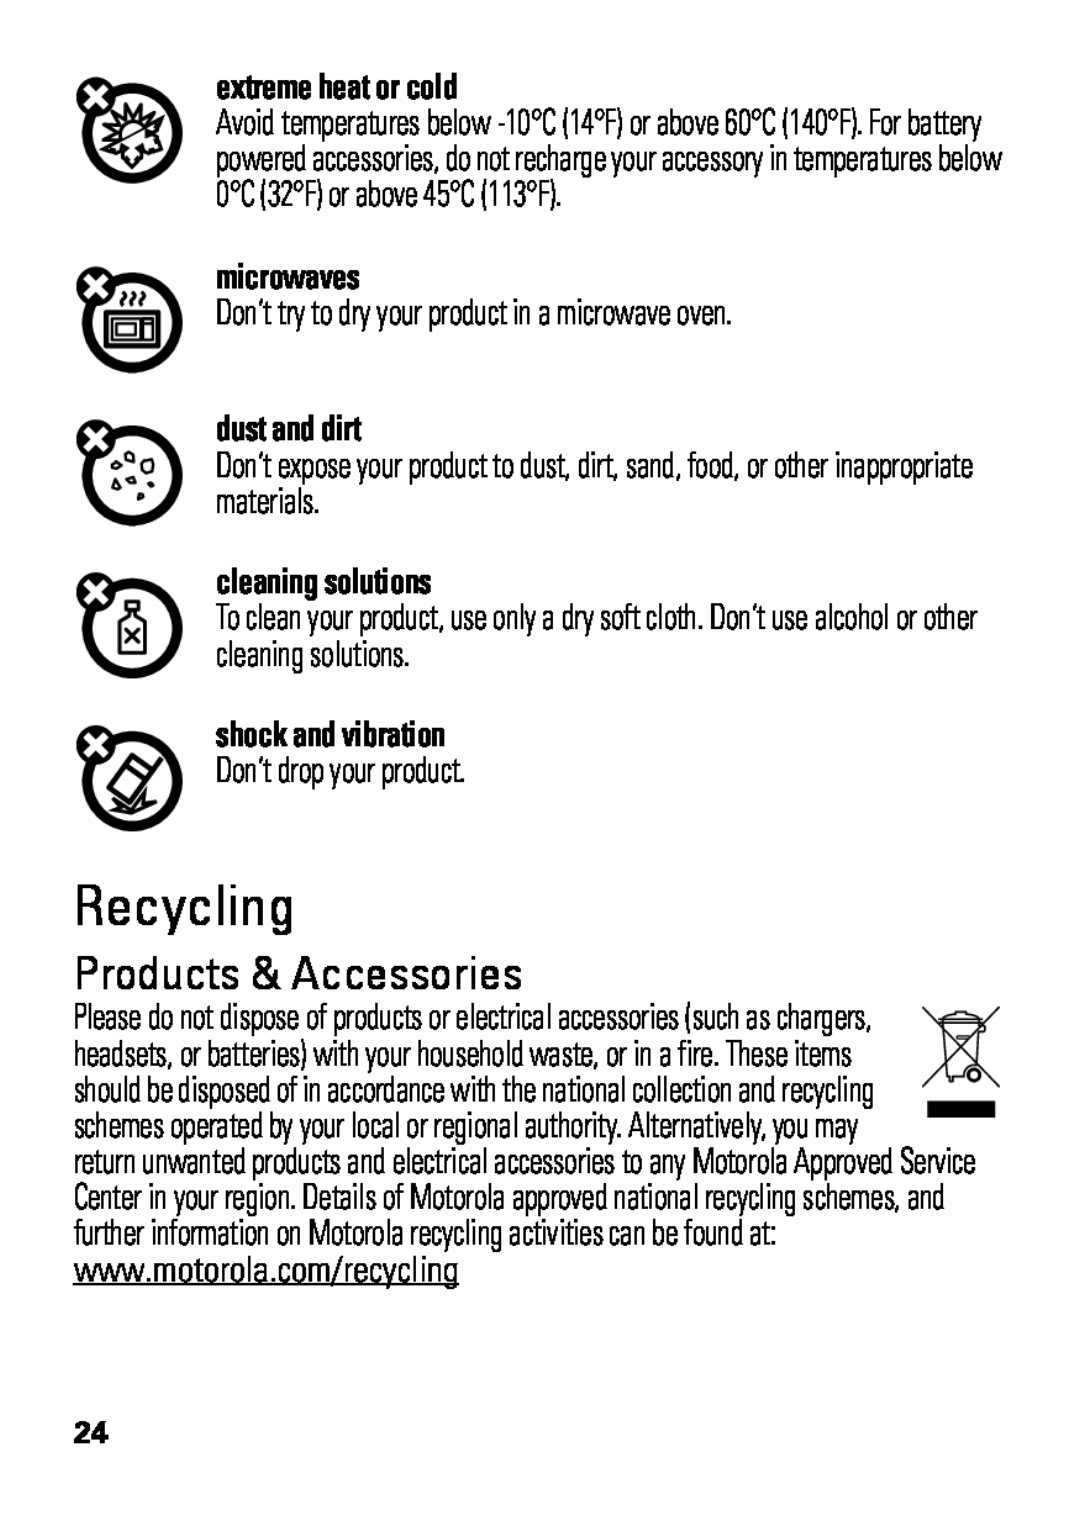 Motorola HX550 Recycling, Products & Accessories, extreme heat or cold, microwaves, dust and dirt, cleaning solutions 